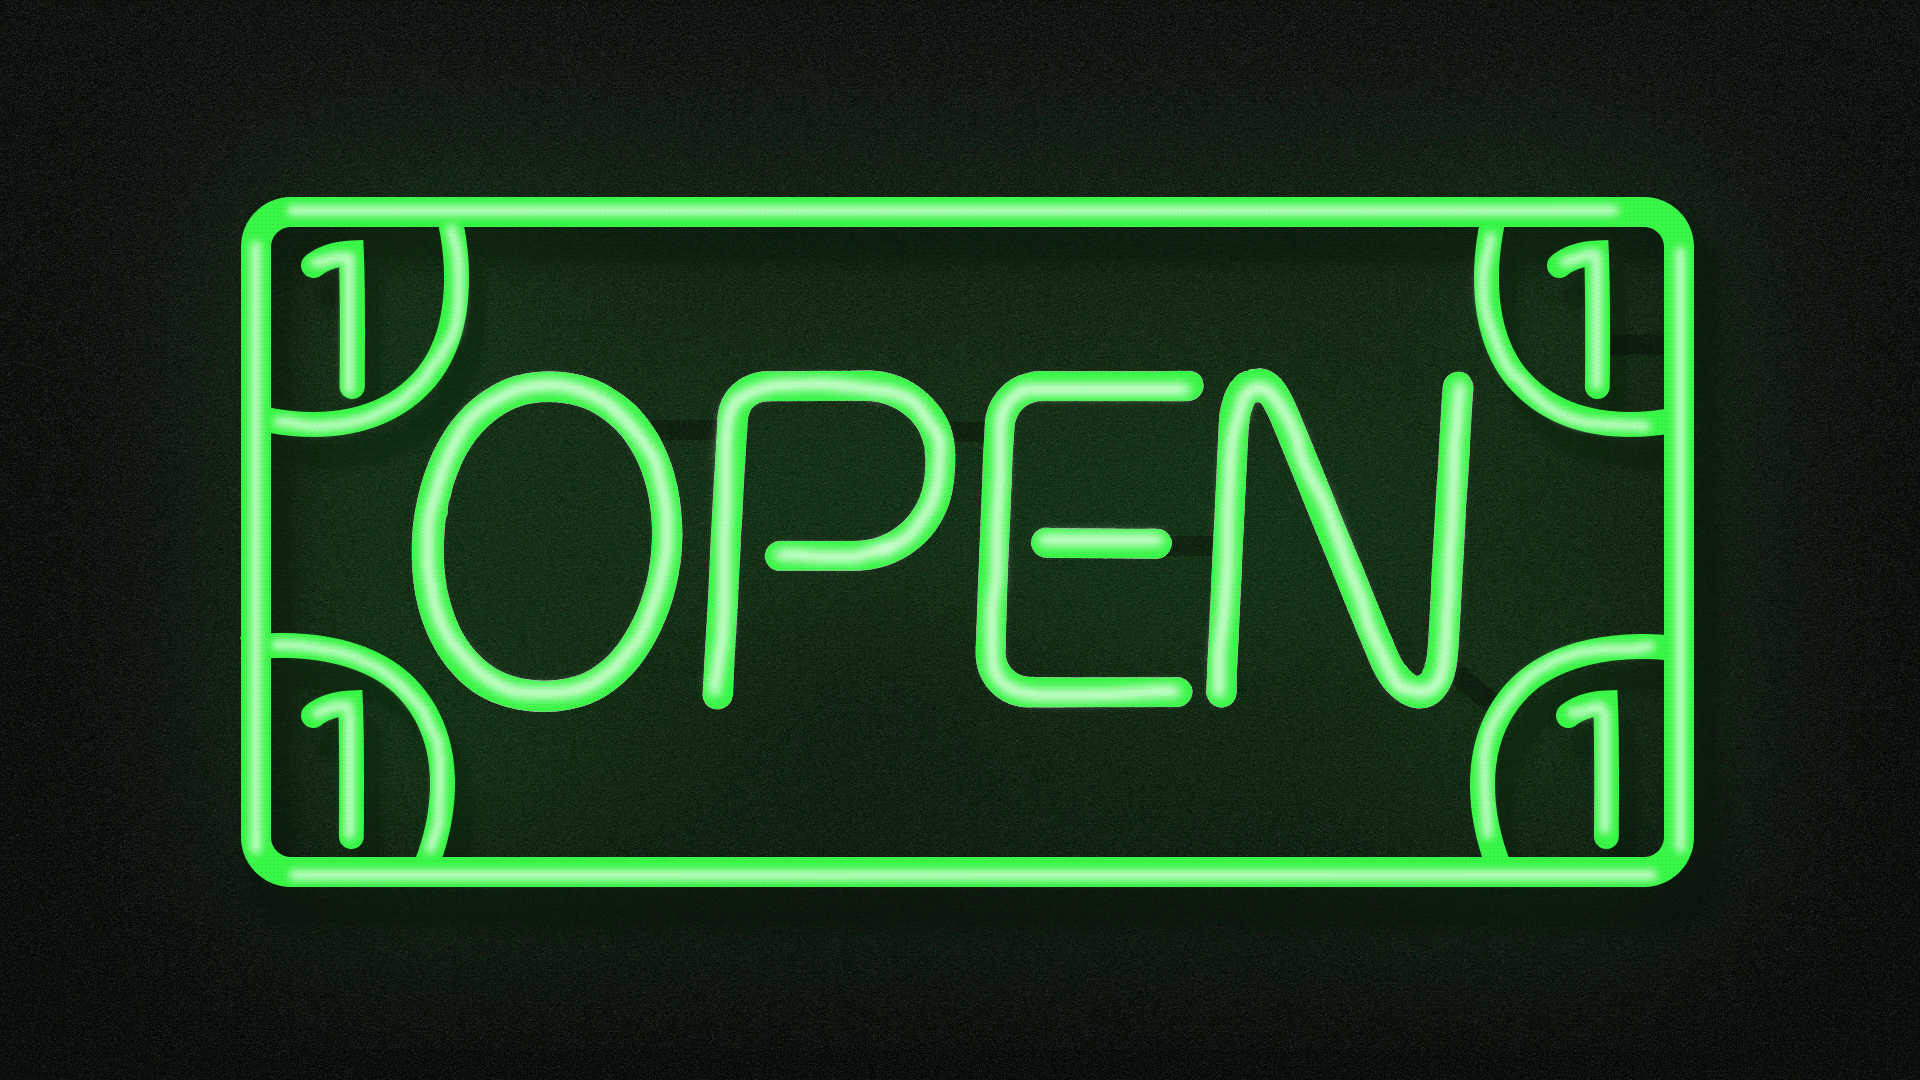 A neon green open sign in the shape of a dollar bill flashes.